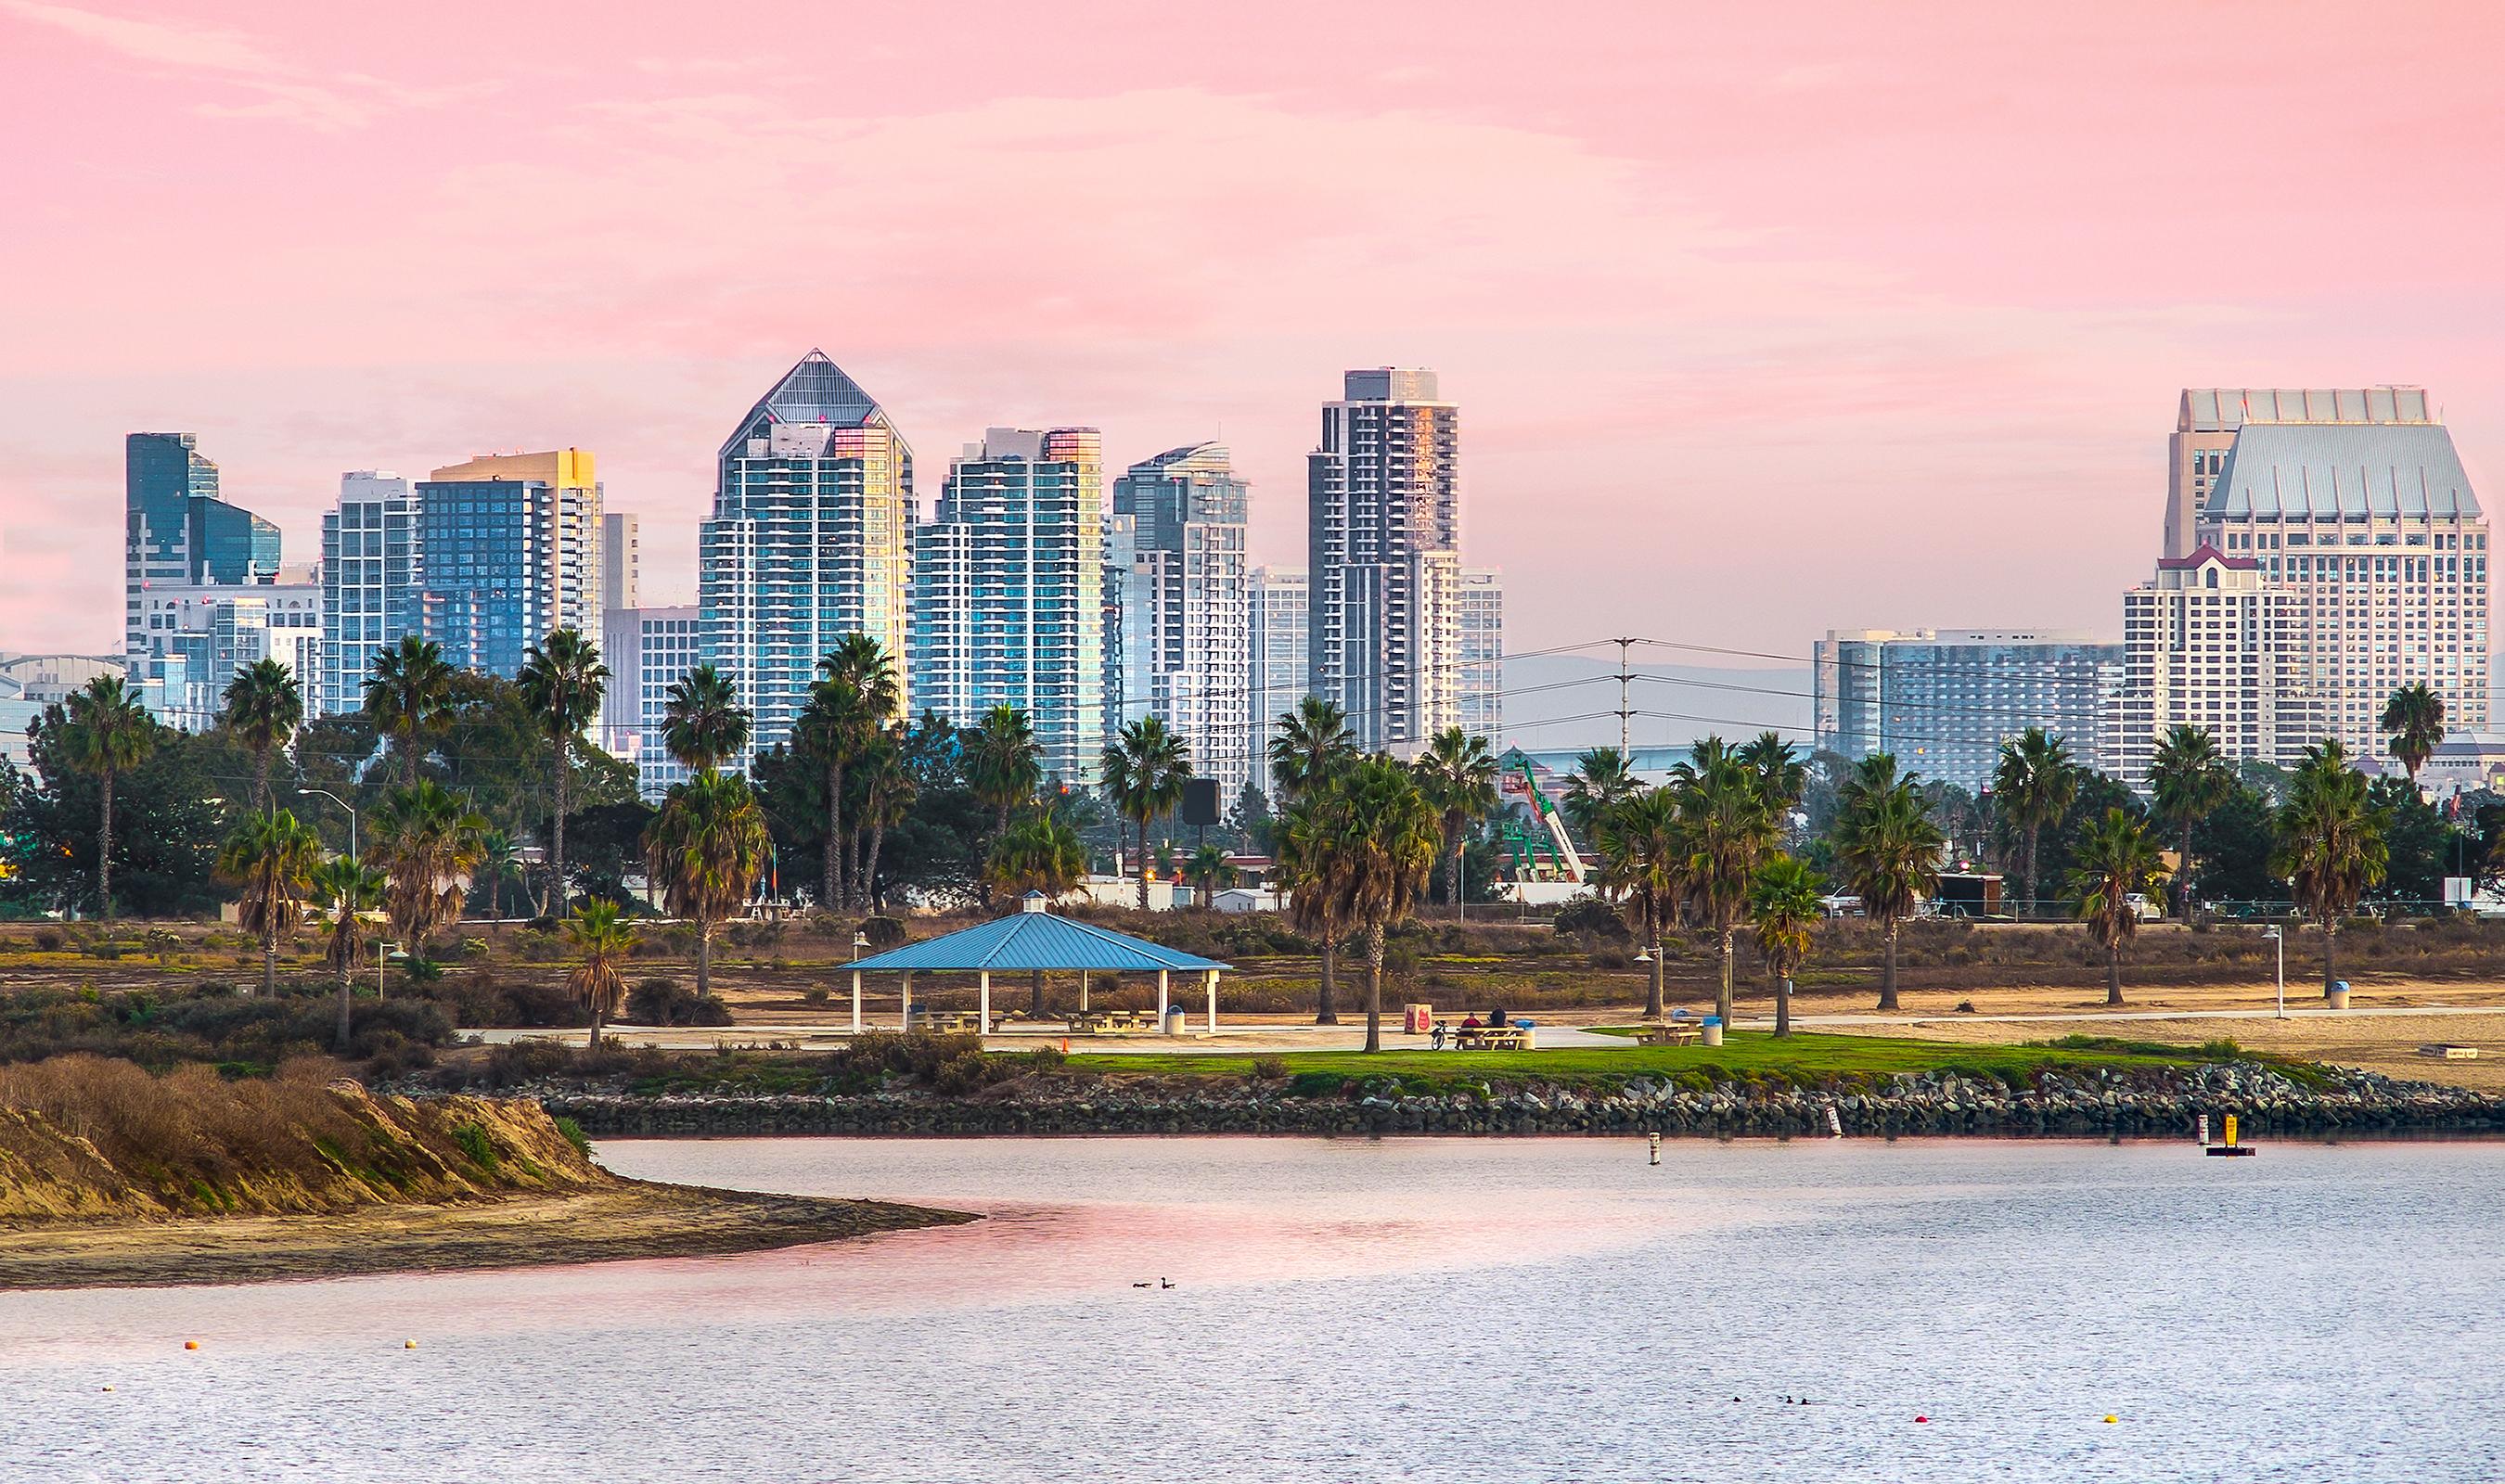 The San Diego city, cover photo